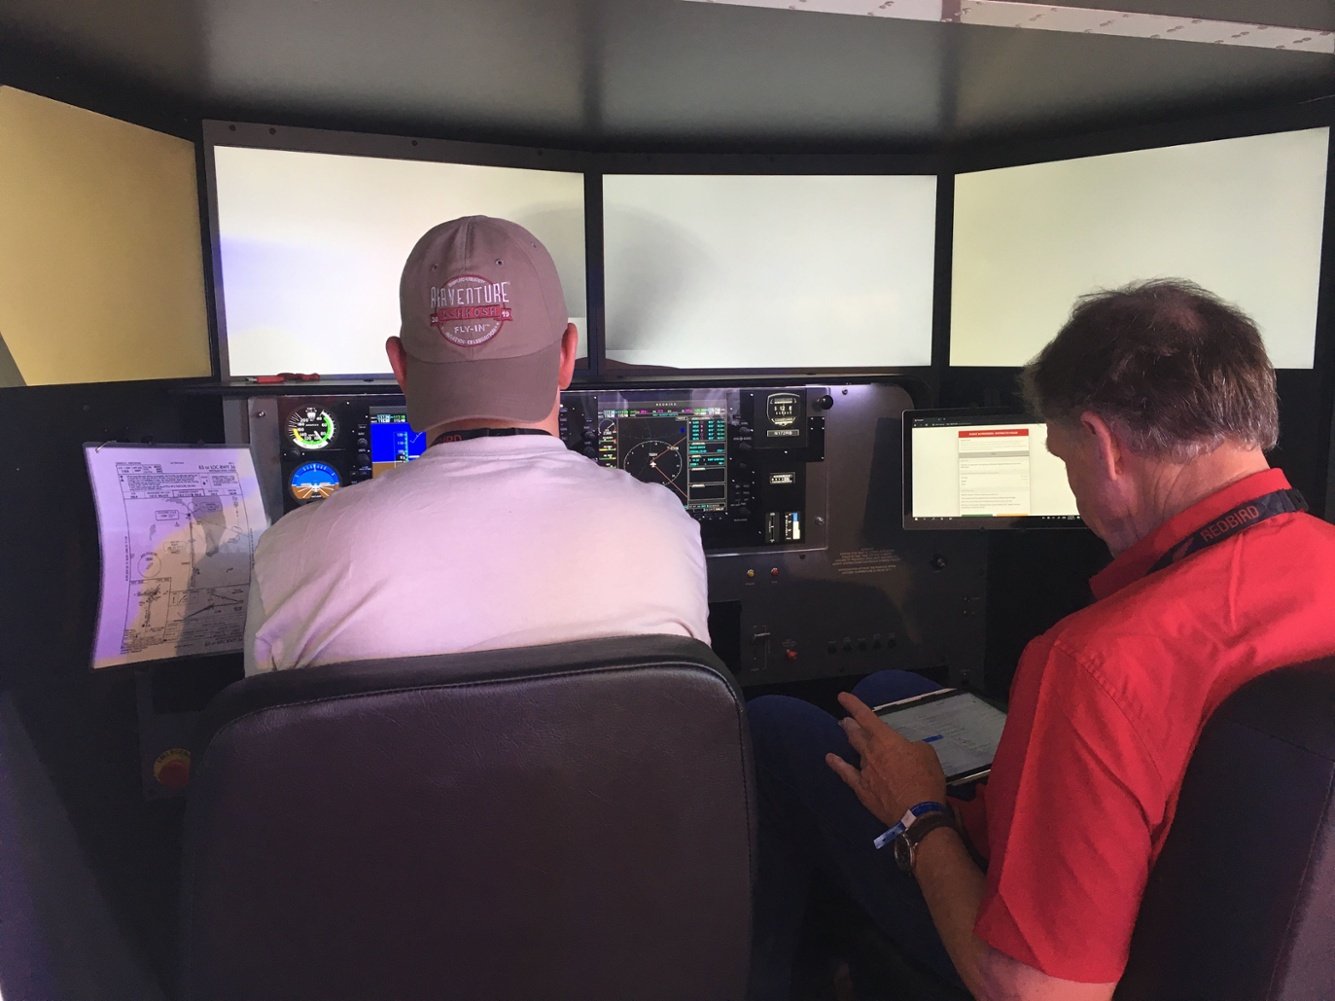 Flight instructor adjusts the weather conditions during an IFR training session in a Redbird simulator